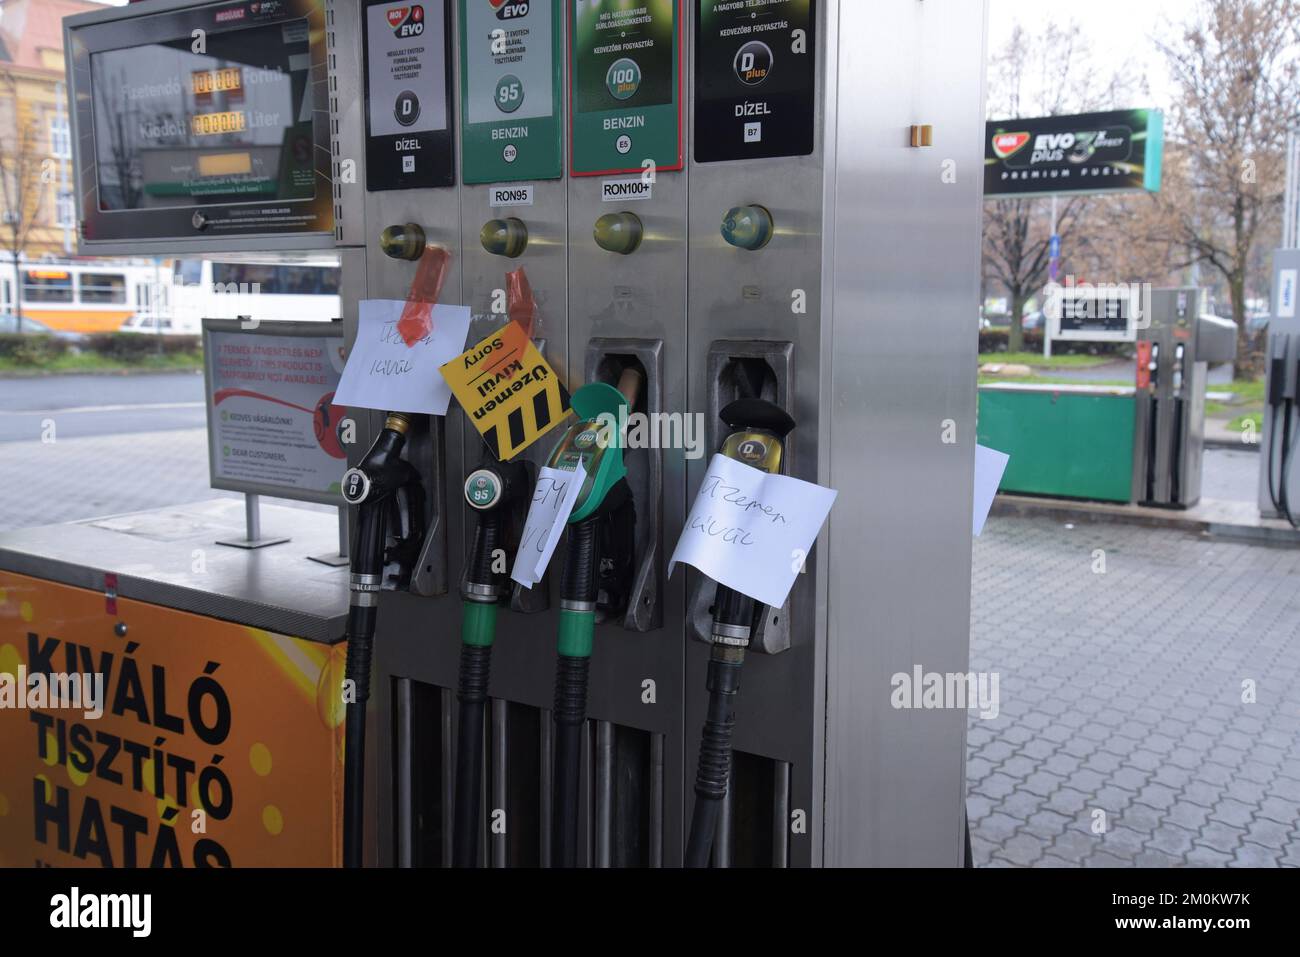 Budapest, Hungary, 7th December 2022. Many filling stations in Hungary were left with no fuel supplies today as motorists queued for hours yesterday to panic buy fuel after Viktor Orban’s government scrapped a controversial fuel price cap earlier than intended. The cap that had set the petrol price at 480 forint ($1.20/£1.00) per litre, by far the cheapest in the European Union, ceased at 11 p.m, local time on Tuesday 6th December, although it was intended to stay in place until the end of December at the earliest. Cabinet Minister Gergely Gulyas blamed EU sanctions on Russian oil for restrict Stock Photo